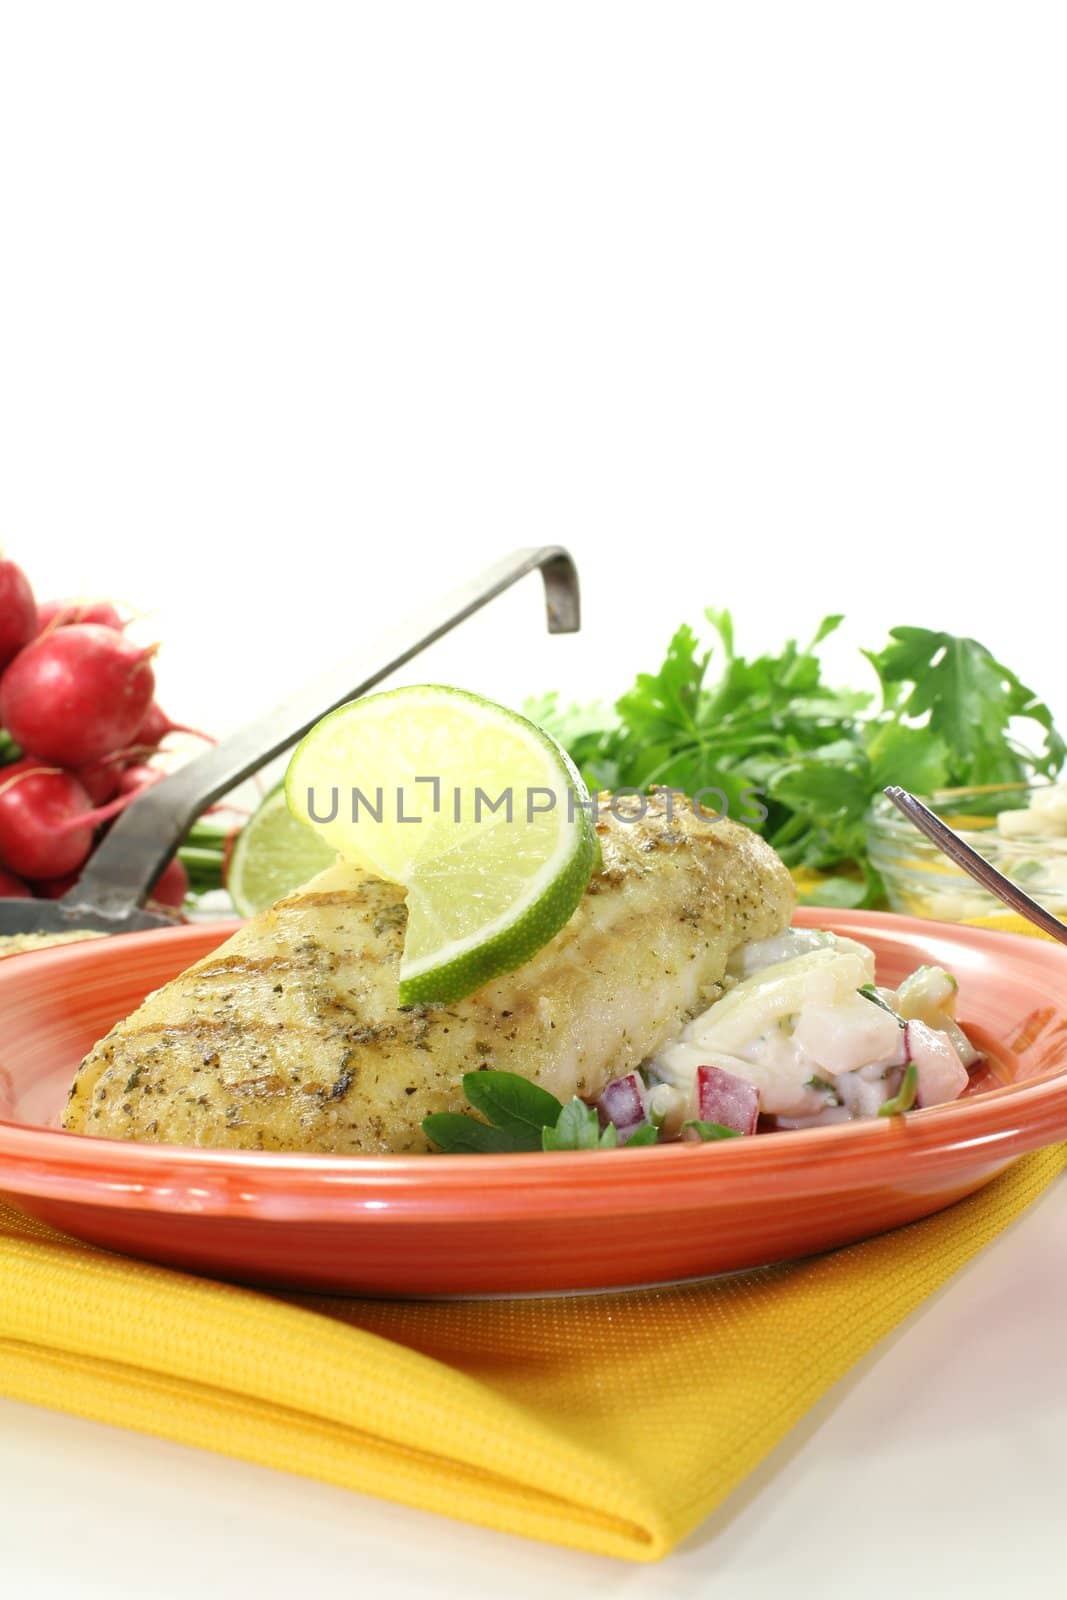 Hake with lemon slice, parsley, chives and potato salad on a light background